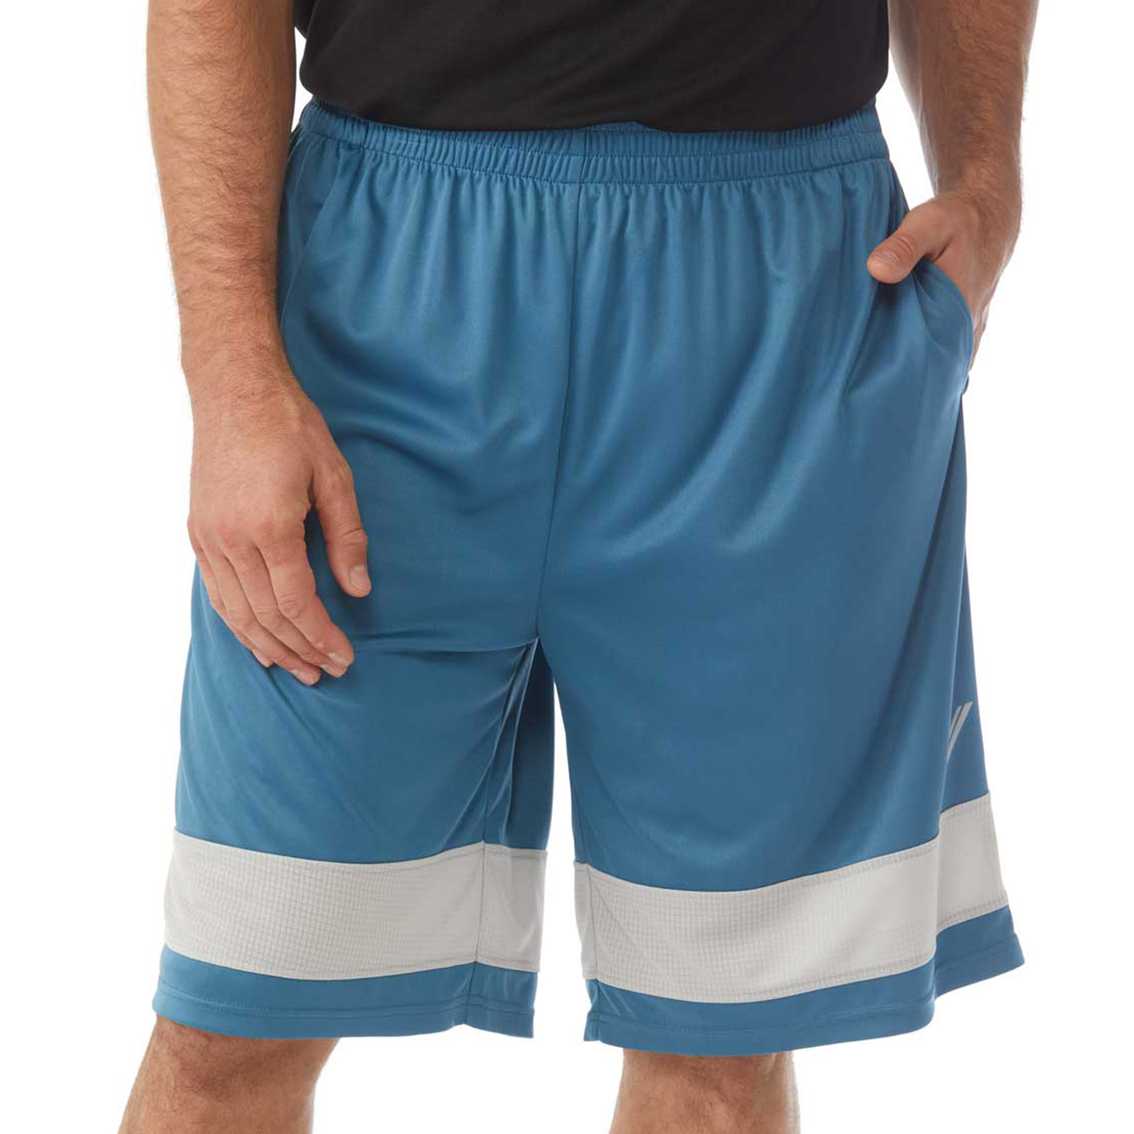 Pbx Pro Polyester Shorts | Shorts | Father's Day Shop | Shop The Exchange